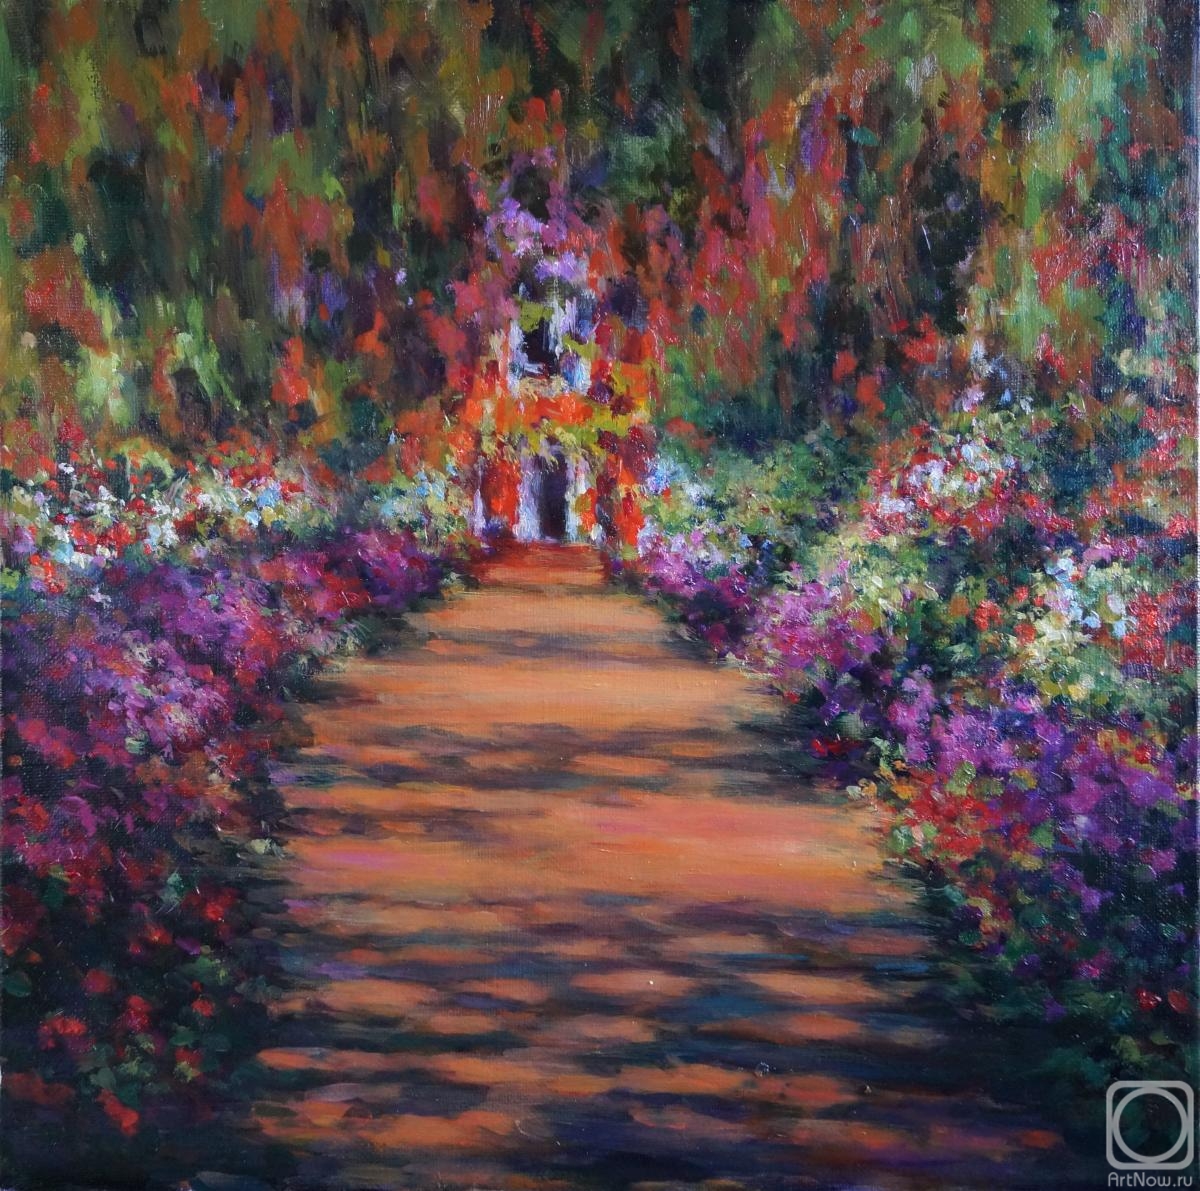 Basistov Sergey. A copy of Monet the artist's Garden at Giverny